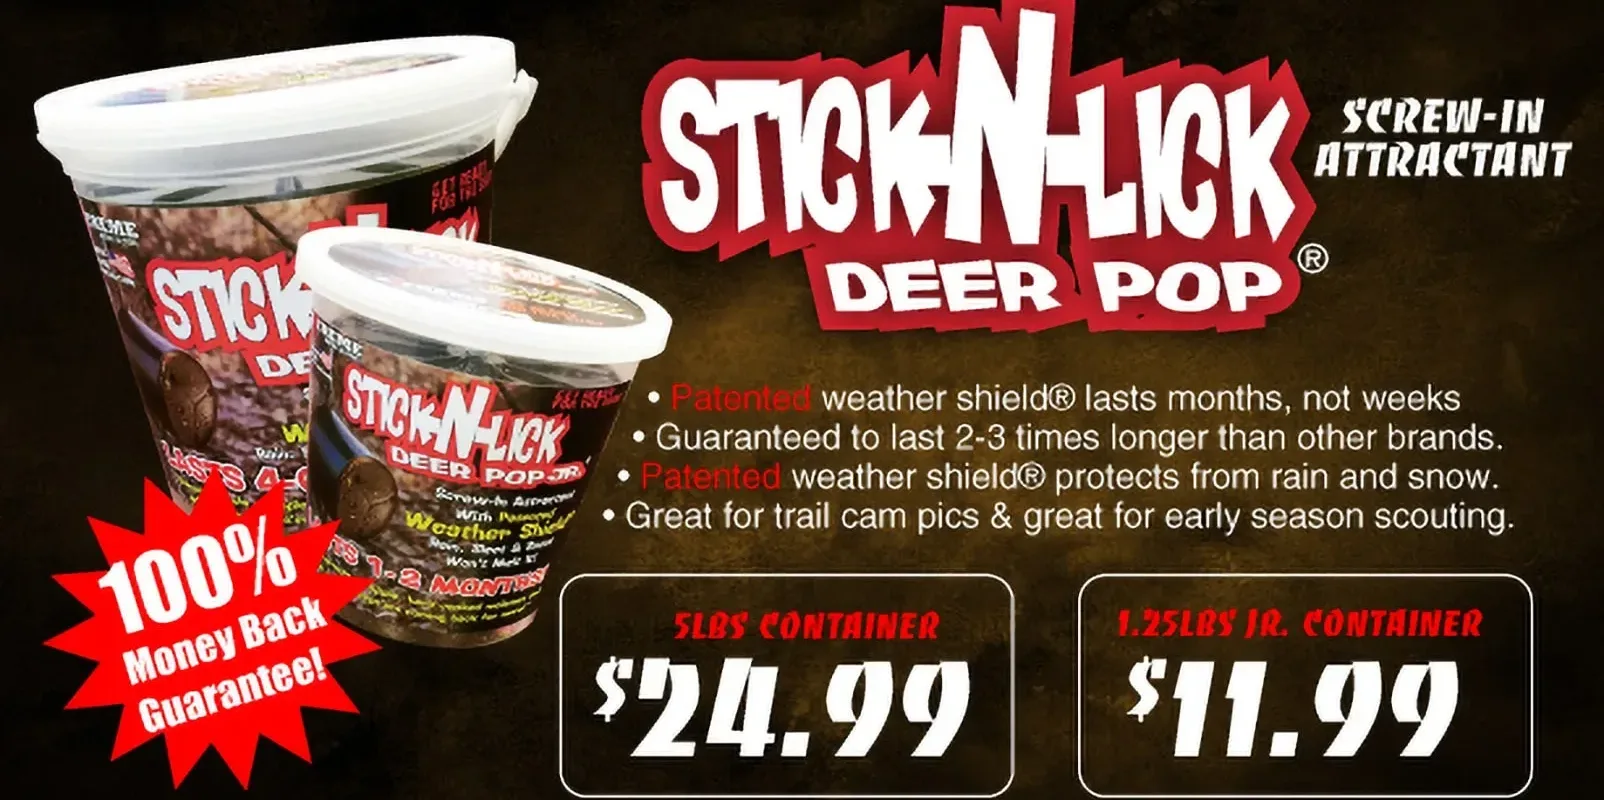 Stick-N-Lick deer pop screw in attractant in 5 pound or 1.25 pound container